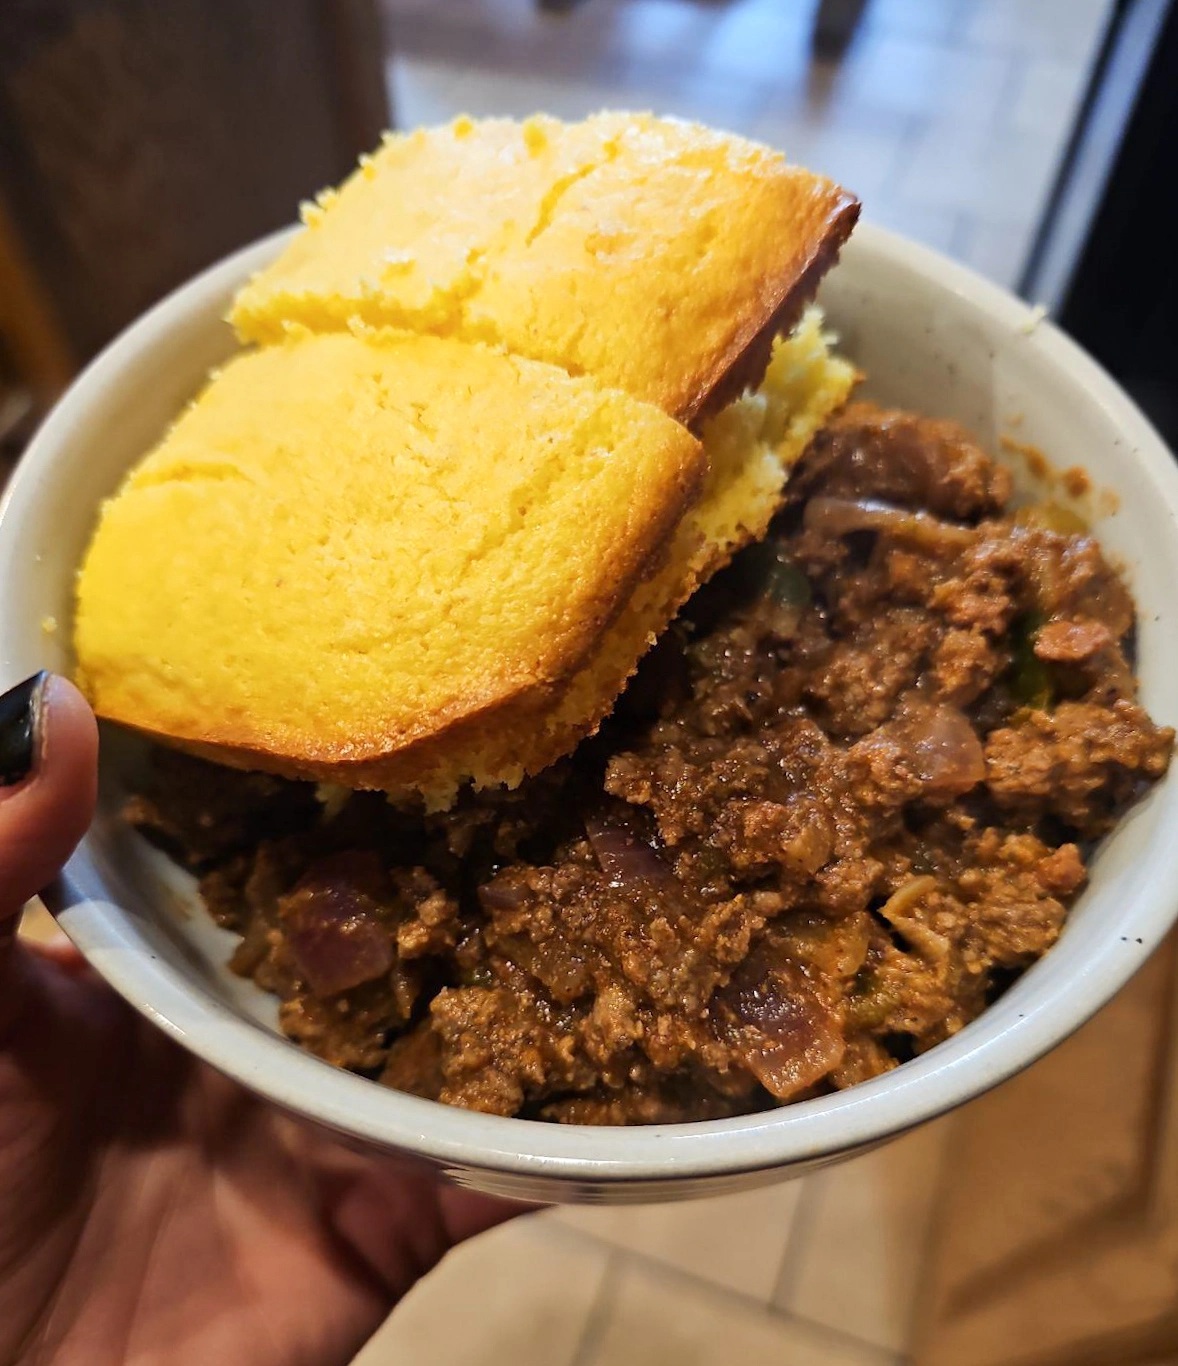 This image shows a bowl full of venison chili with cornbread on the side.